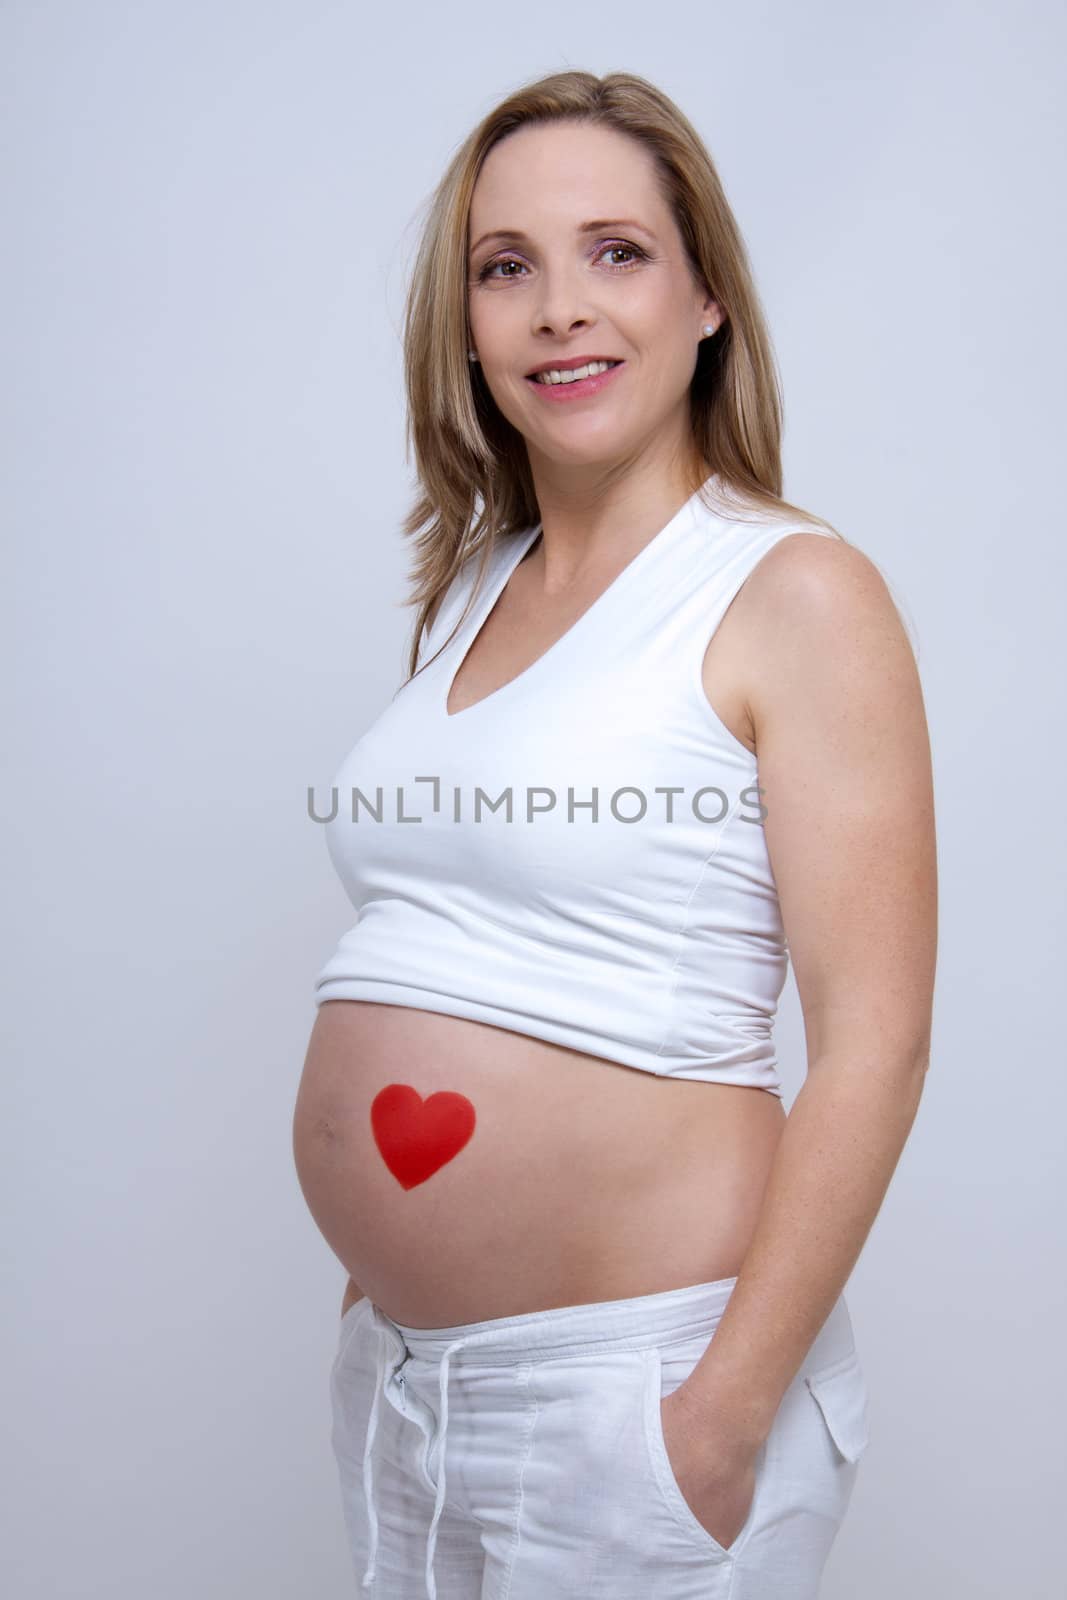 older pregnant woman looks forward to her baby by juniart